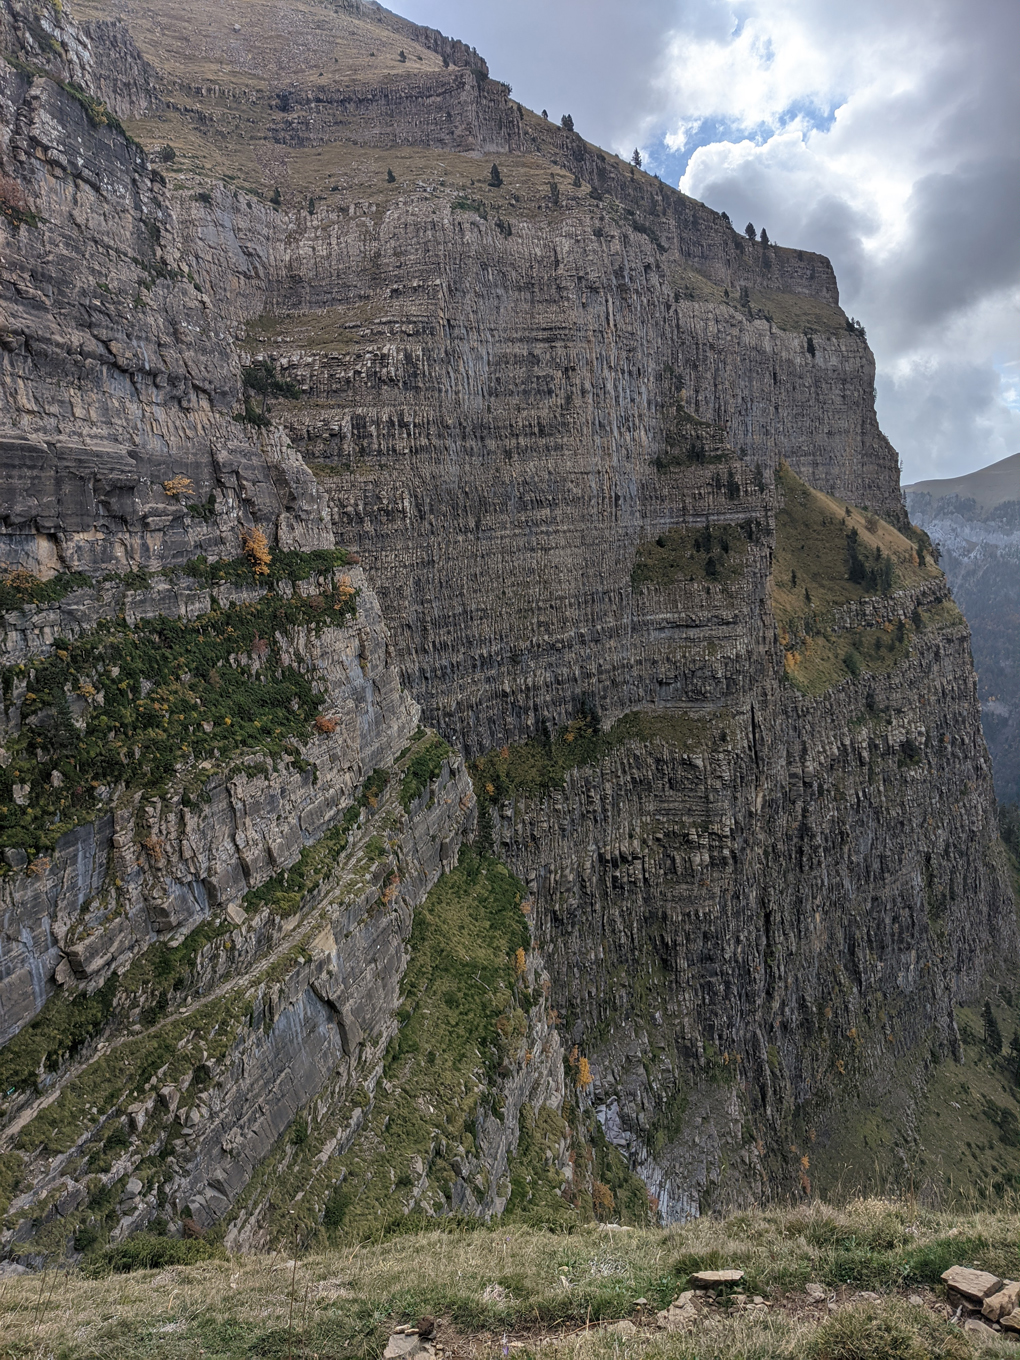 Photo looking across steep cliff faces in Ordesa National Park with path following the contour line